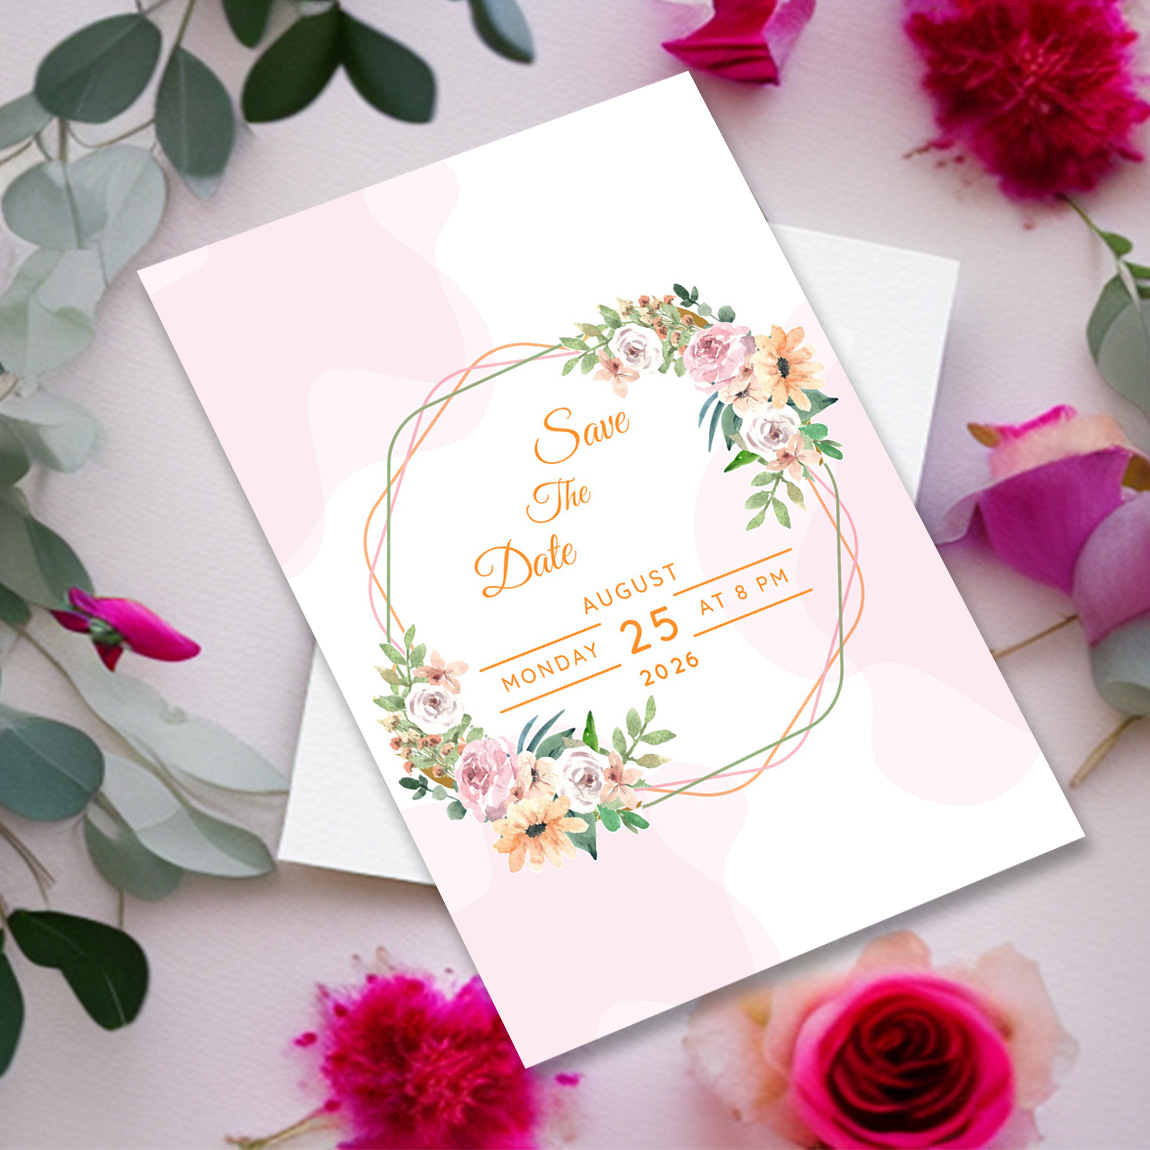 Image with amazing wedding invitation with flowers and leaves.